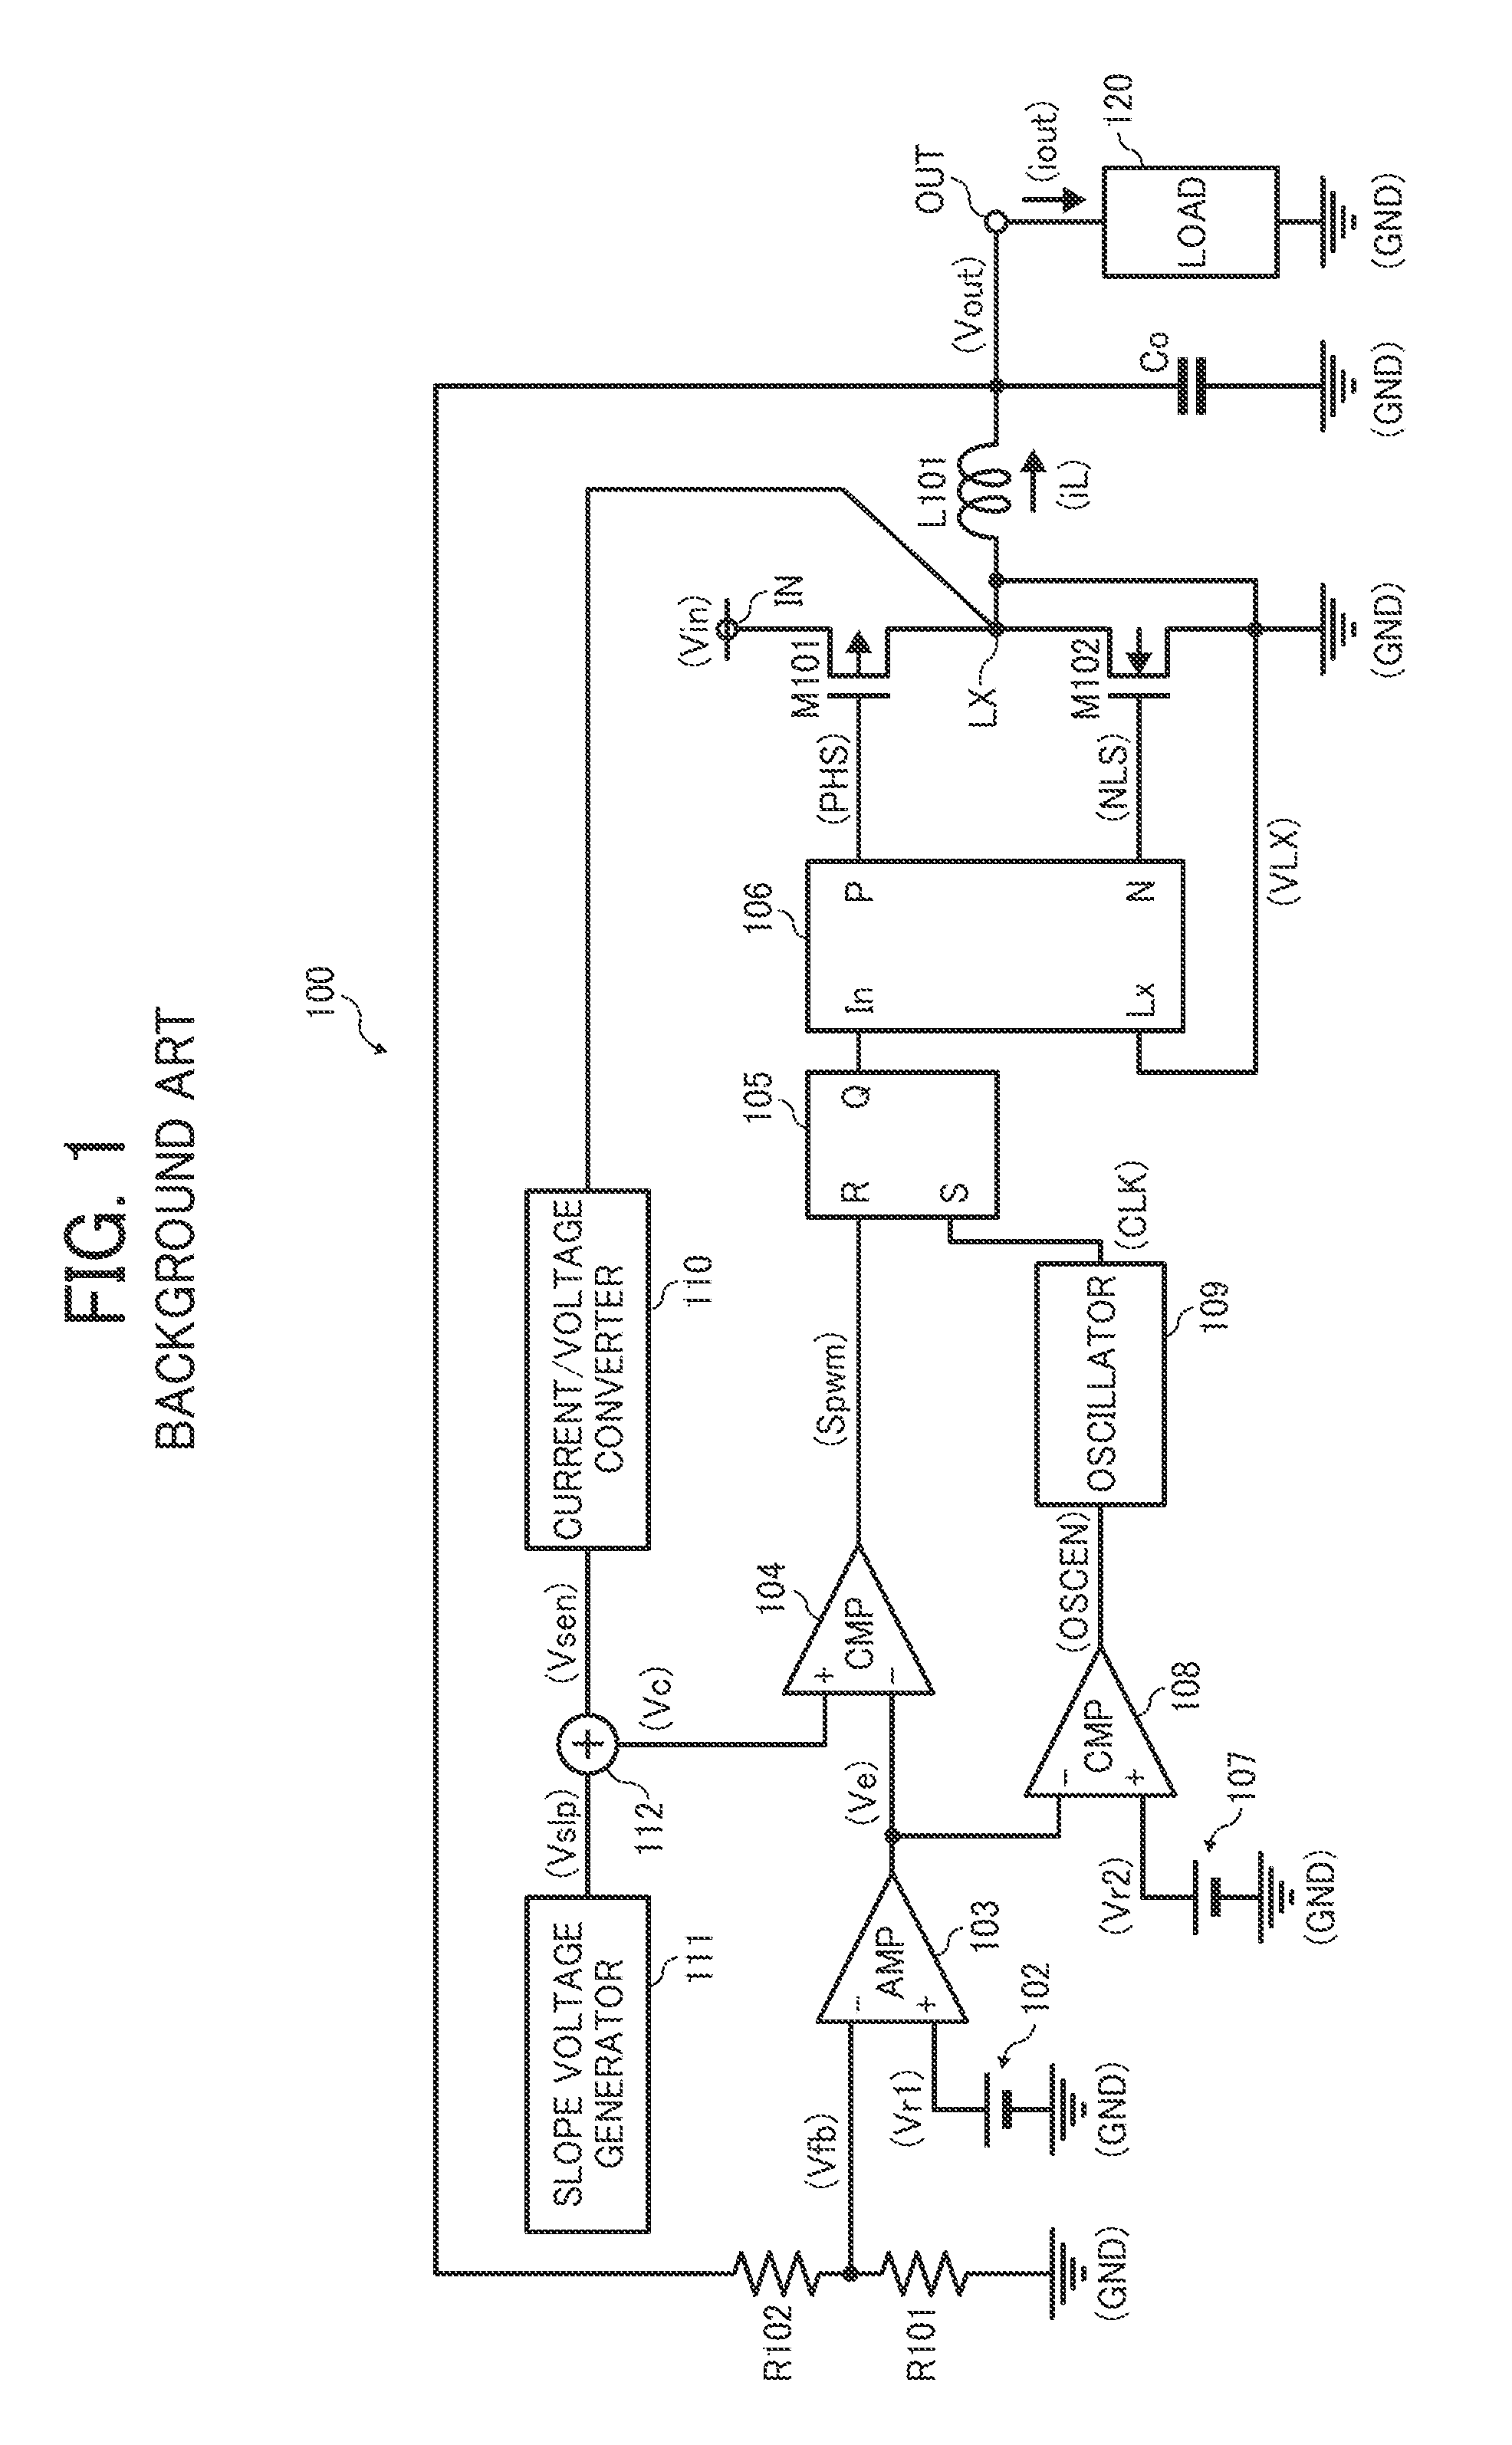 Non-isolated current-mode-controlled switching voltage regulator